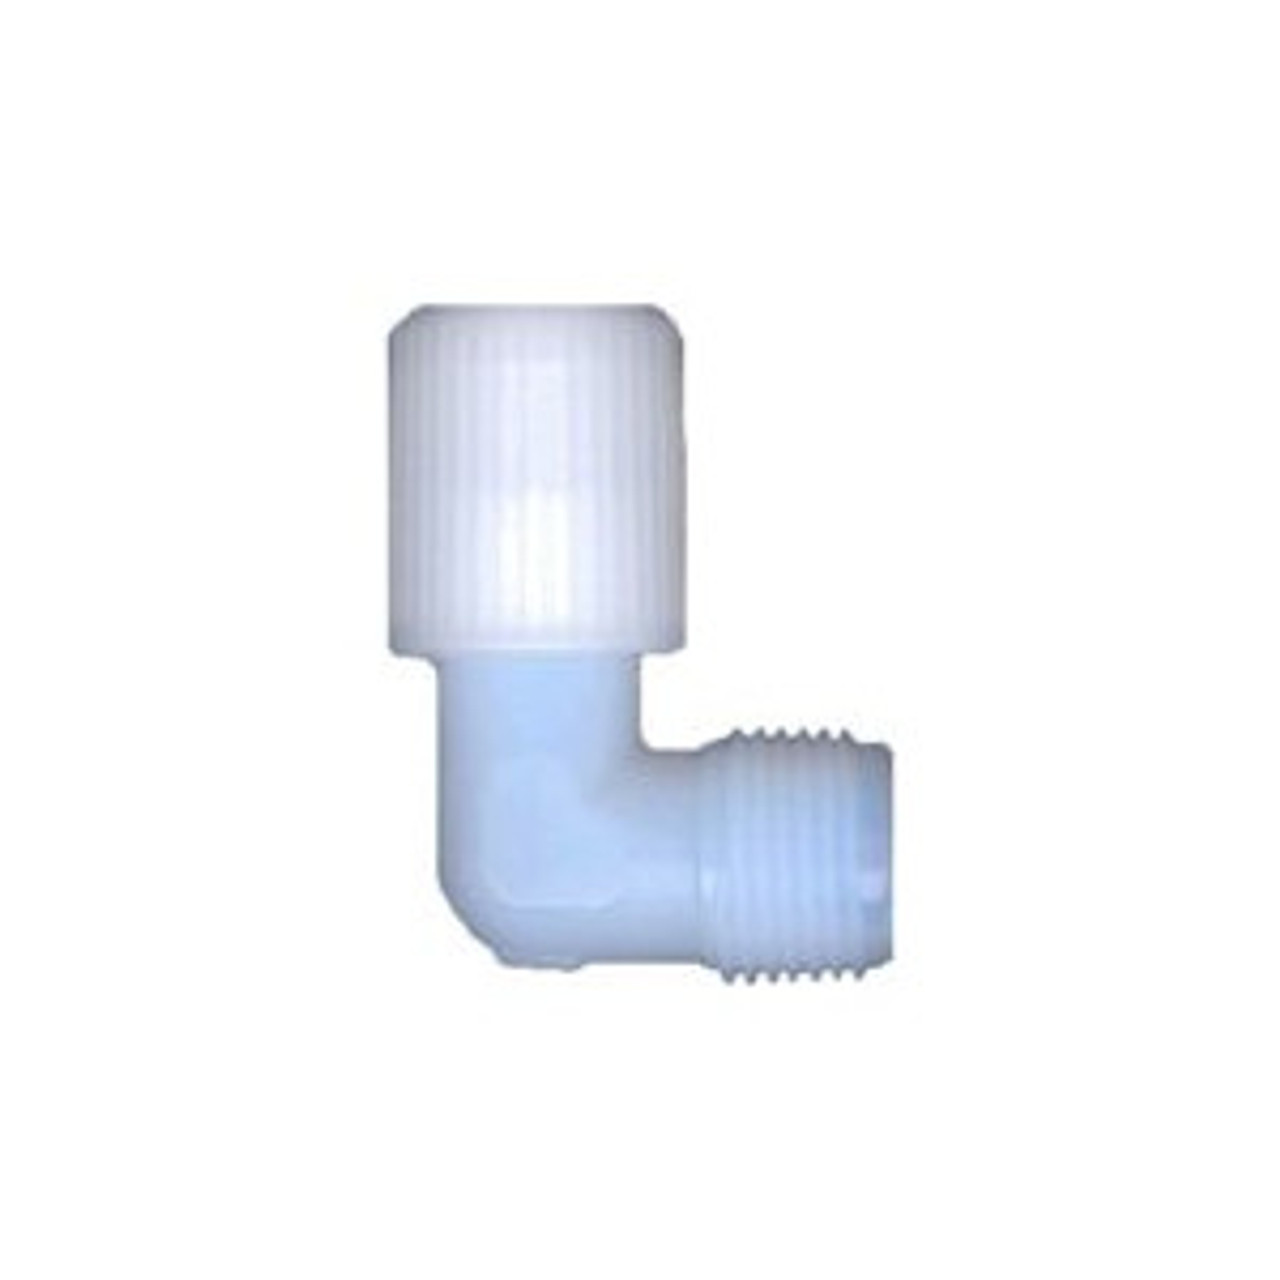 ME8-8N-3 Fit-LINE, Female Elbow Fitting